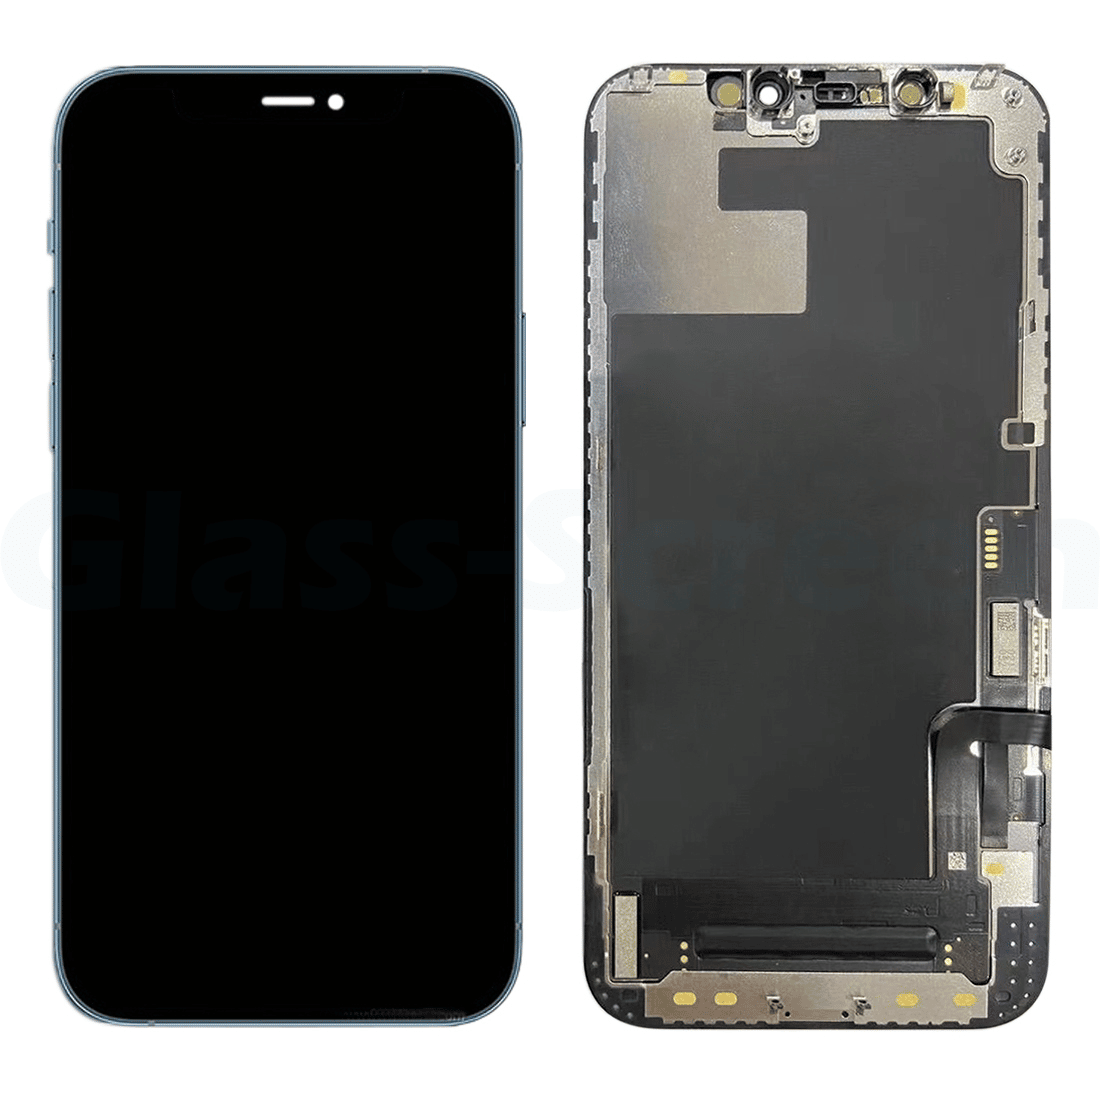 iPhone 12 Pro Max LCD Screen Assembly Replacement (Refurbished)